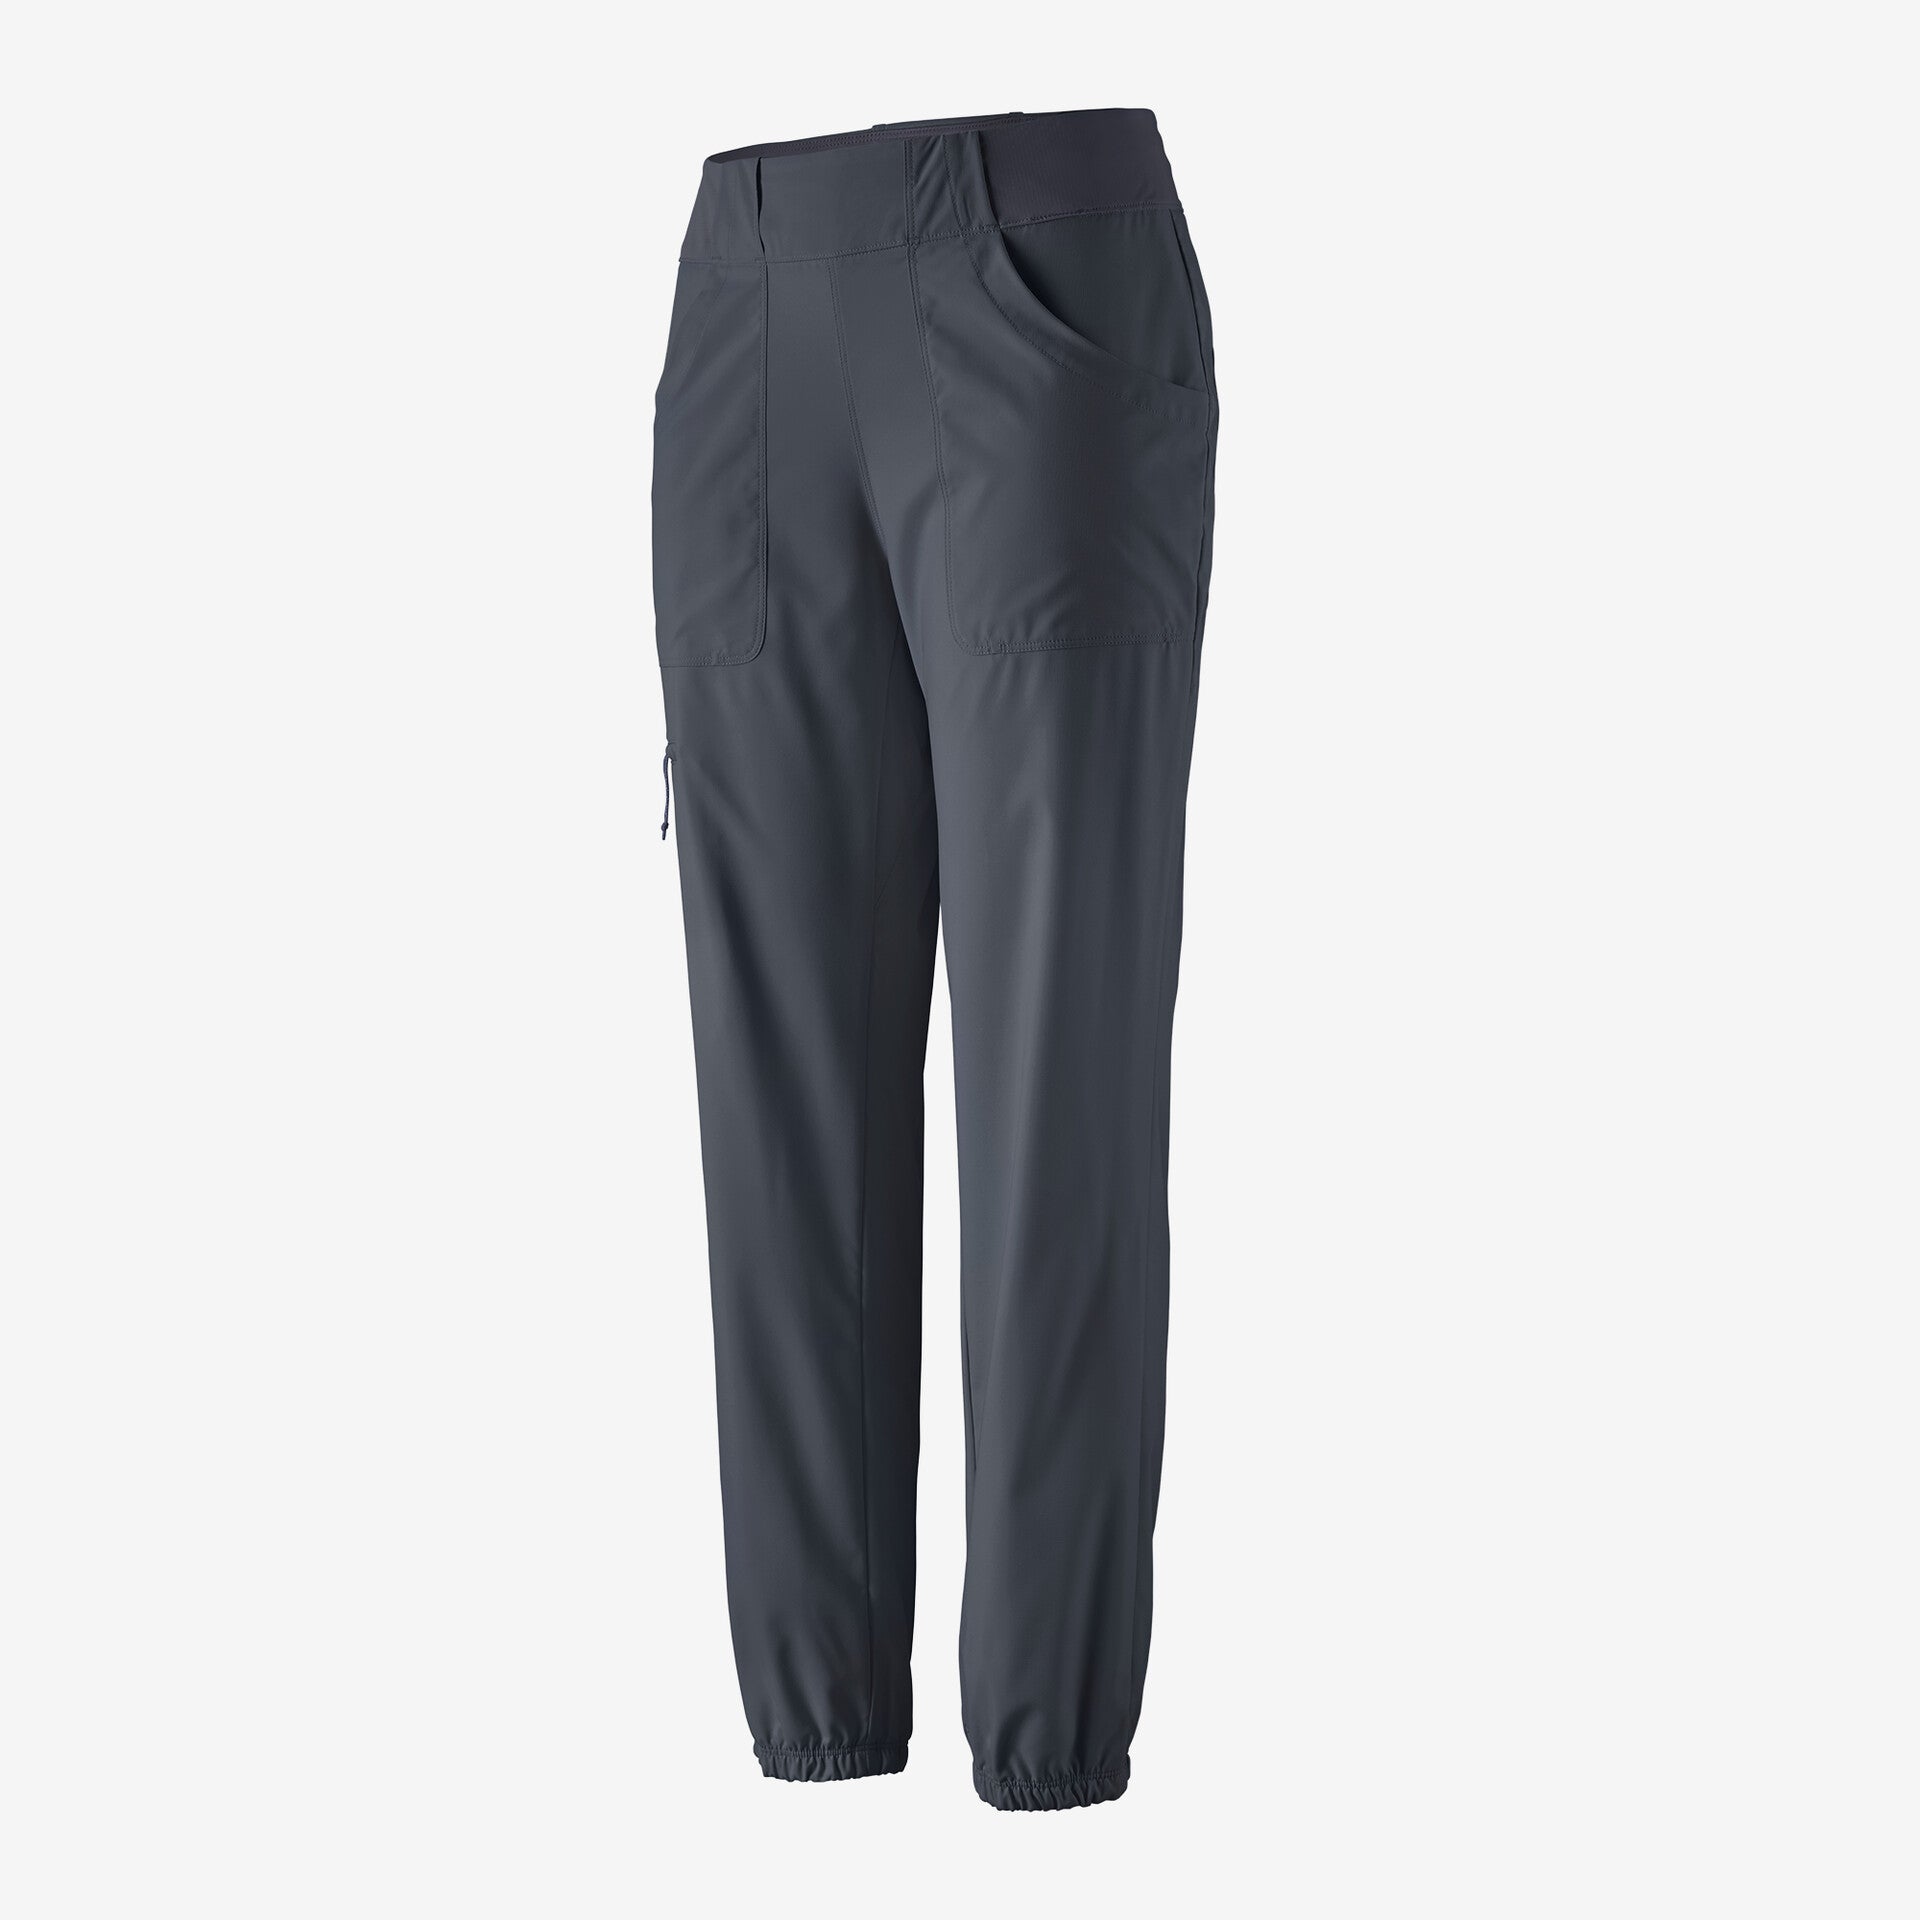 Patagonia Jogger Athletic Pants for Women